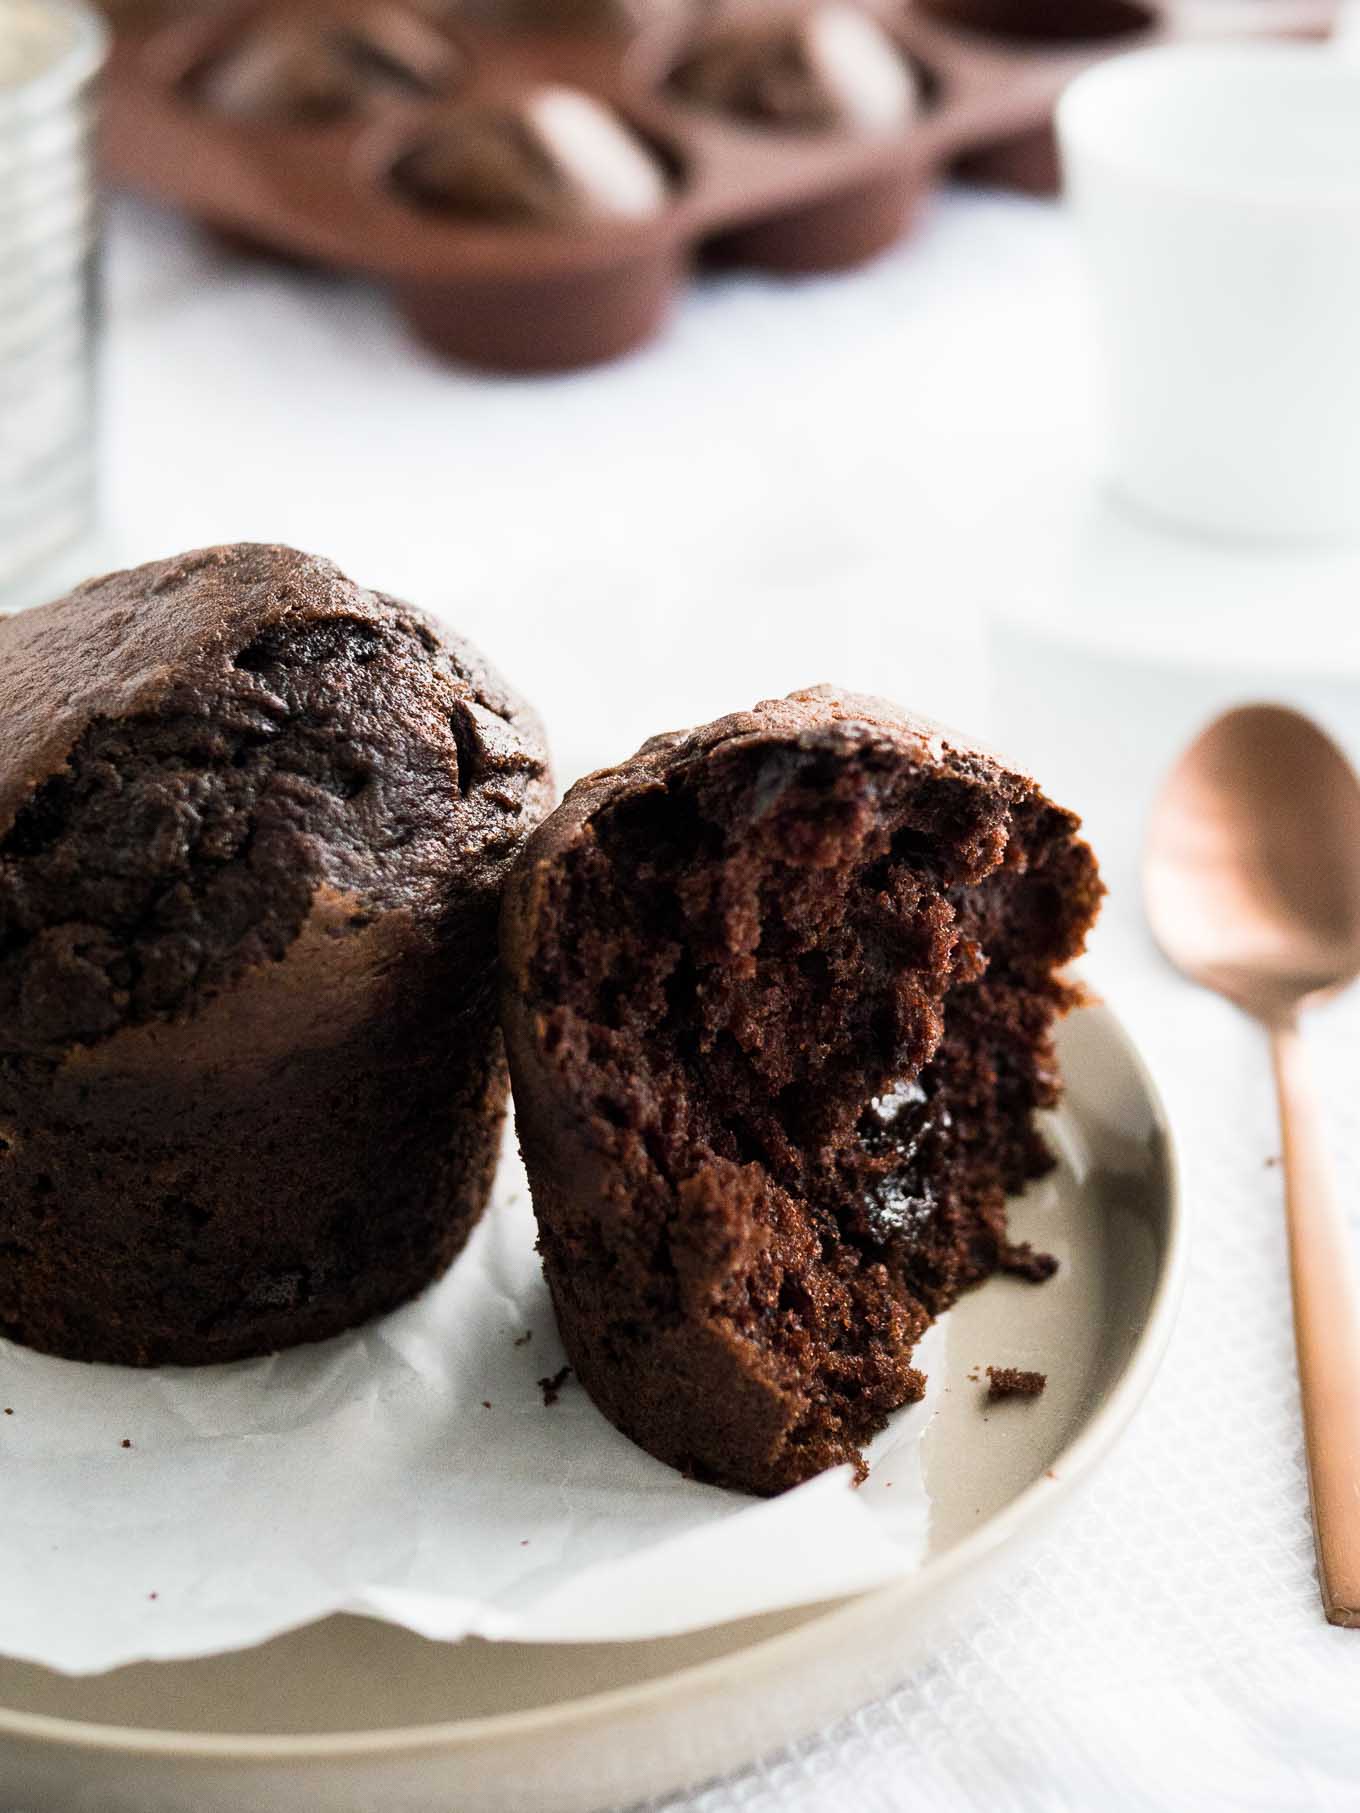 These Double Chocolate Banana Muffins are fluffy and delicious yet they're healthier than a typical bakery-style muffin!